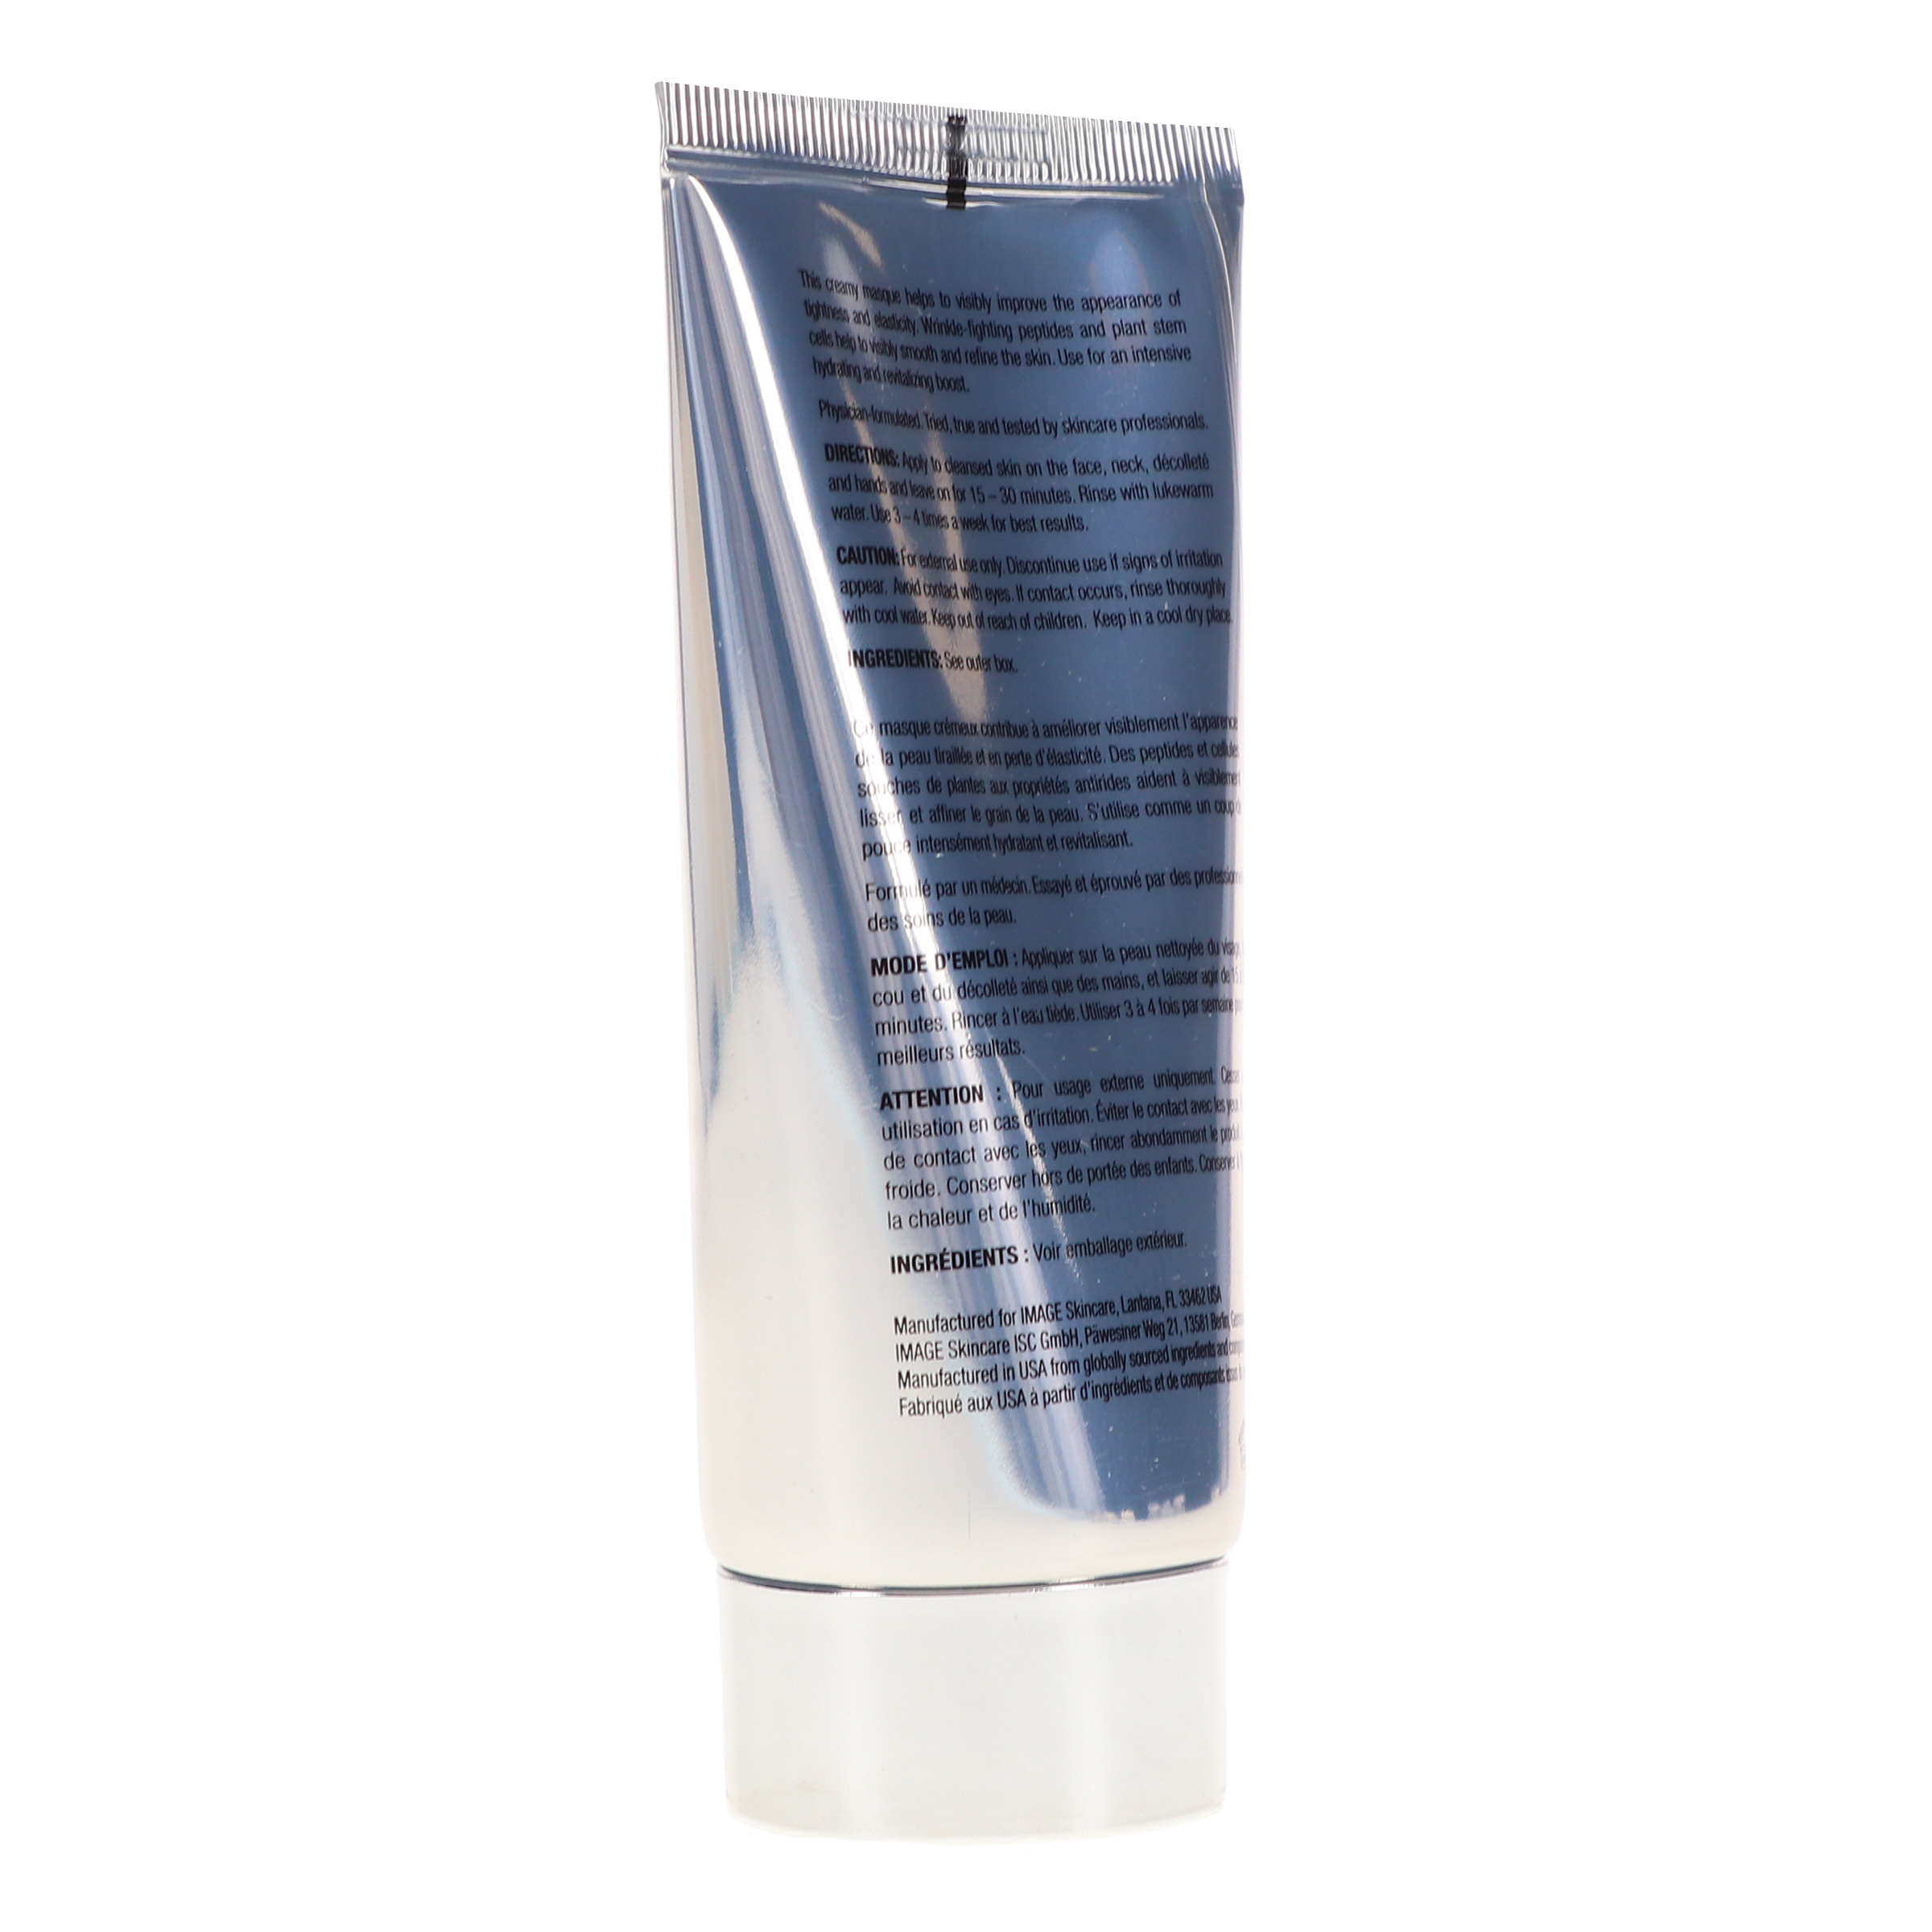 IMAGE Skincare The MAX Stem Cell Masque 2 oz - image 3 of 8